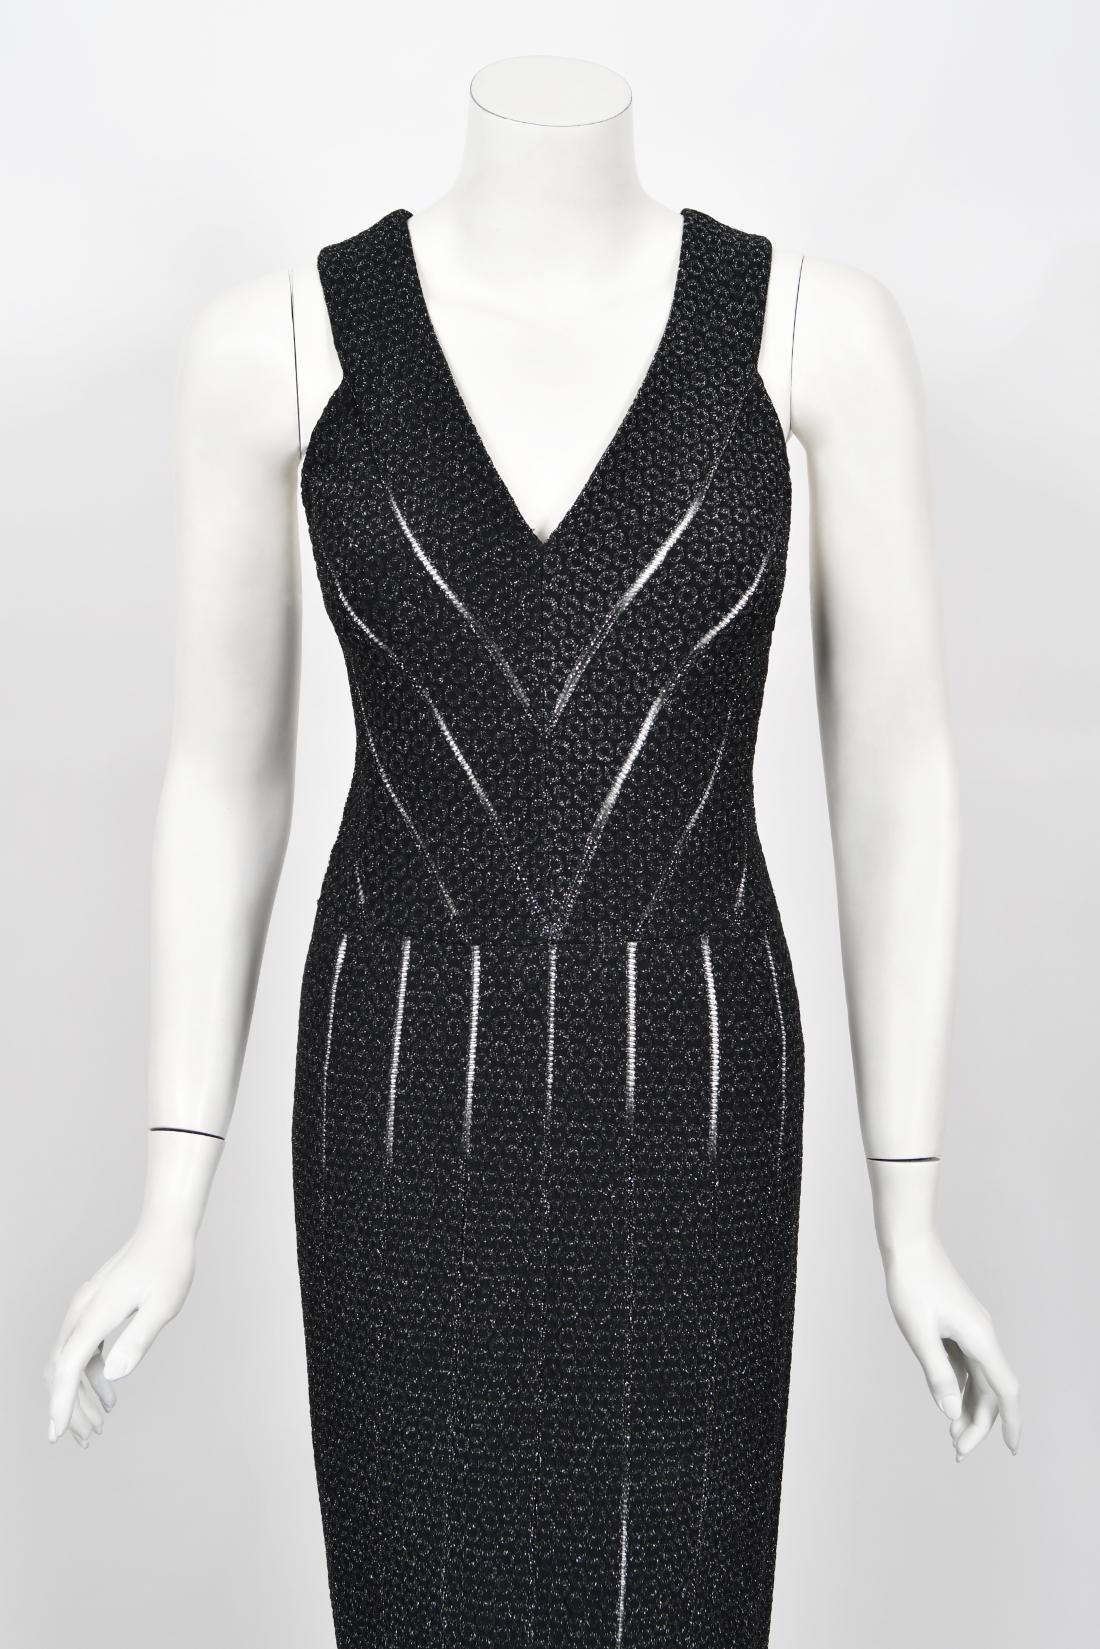 Vintage Azzedine Alaia Black Metallic Knit Bodycon Sheer Cutwork Fishtail Gown In Good Condition For Sale In Beverly Hills, CA